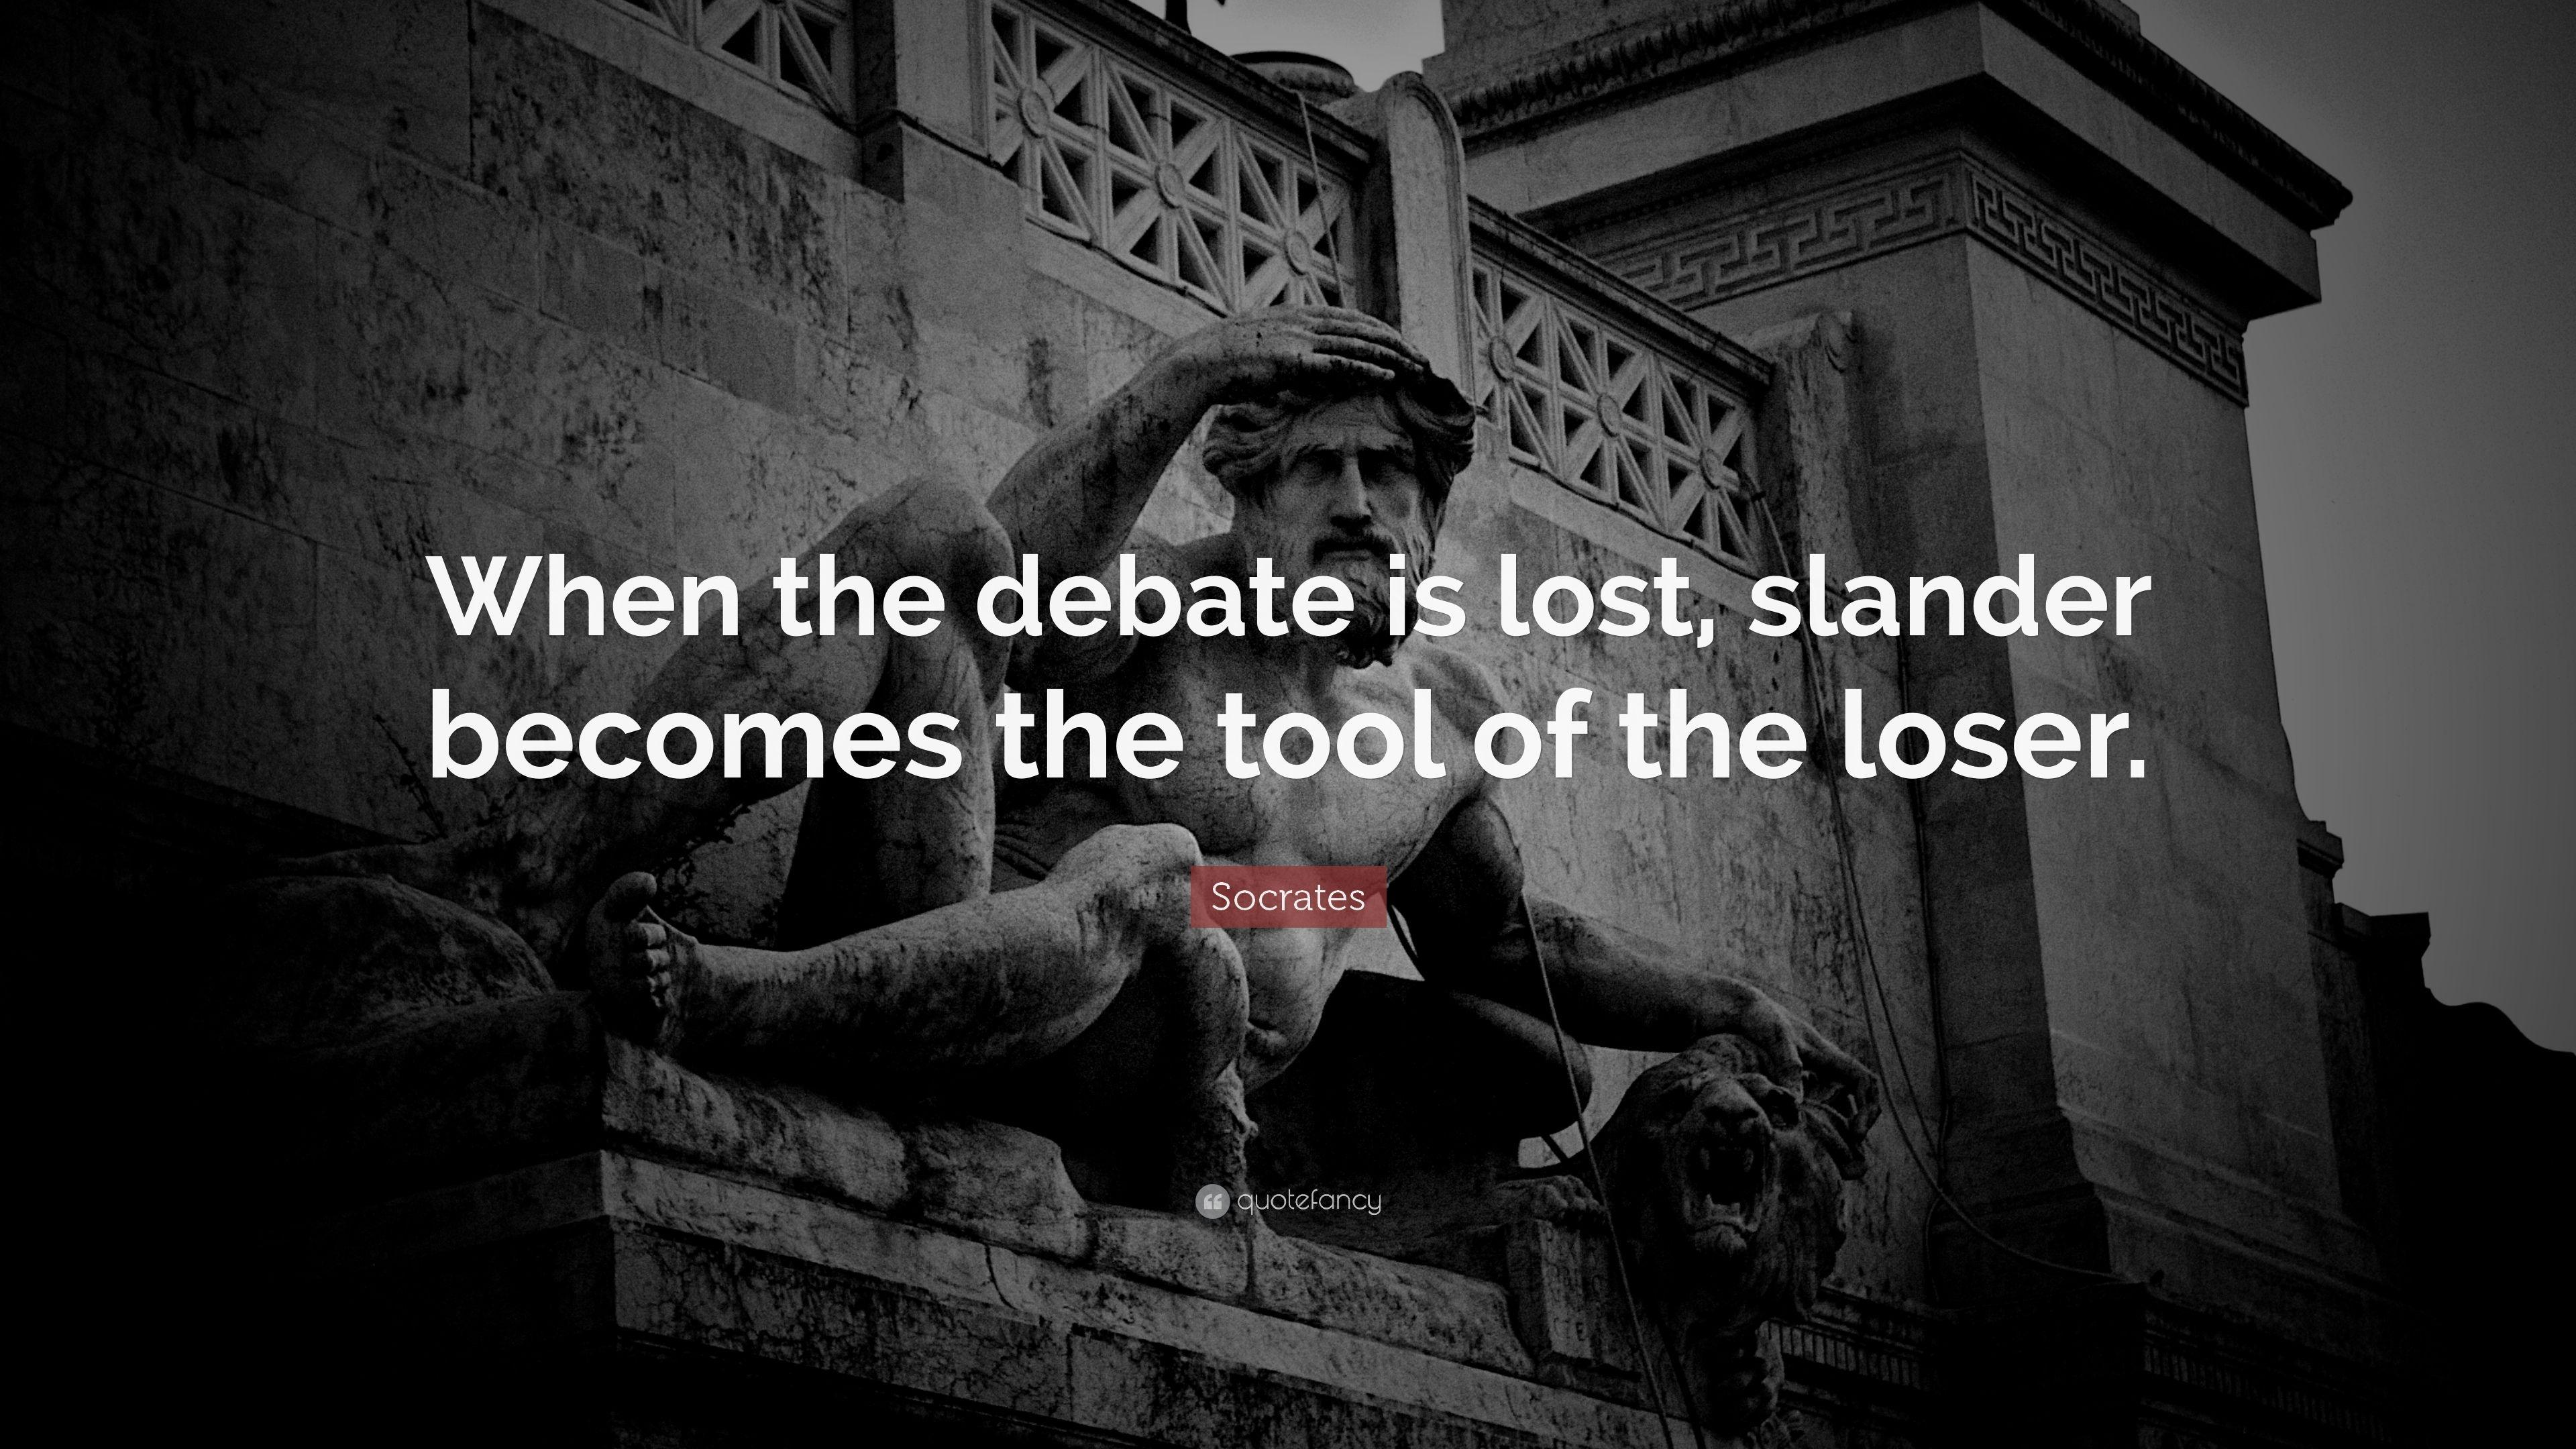 Socrates Quote: “When the debate is lost, slander becomes the tool